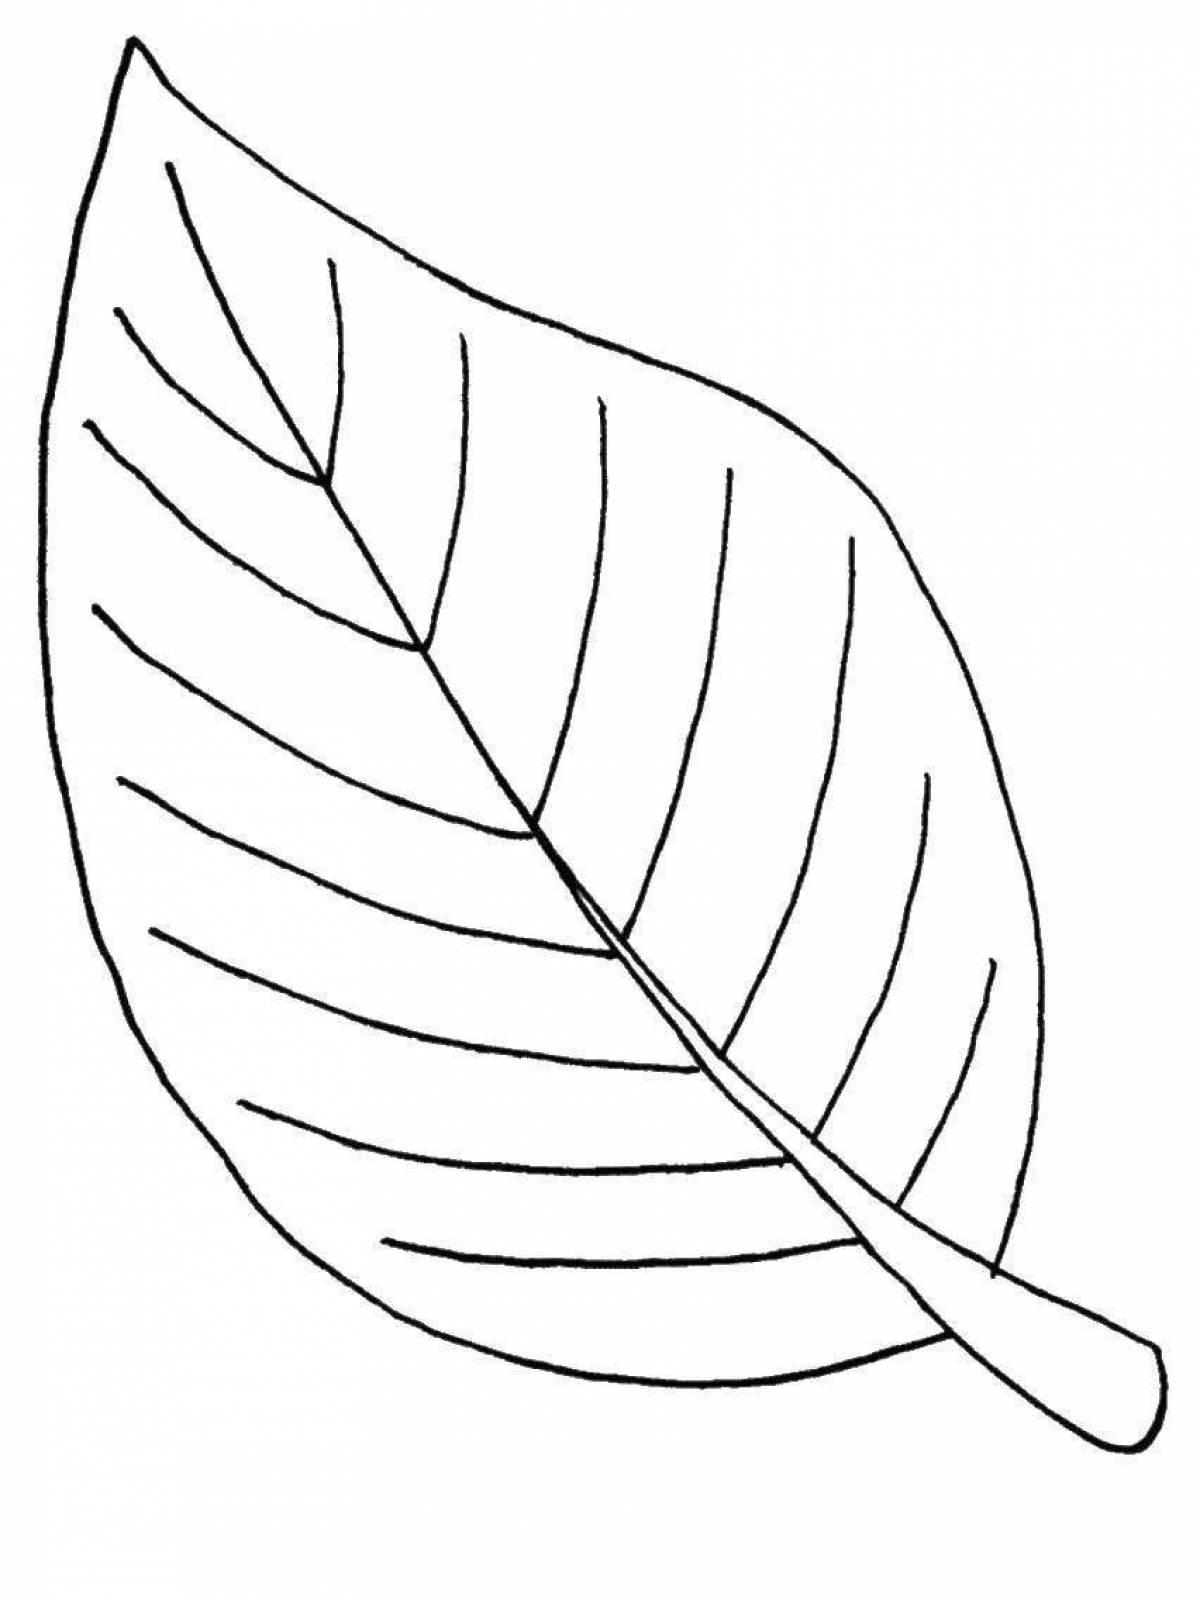 Adorable leaves coloring book